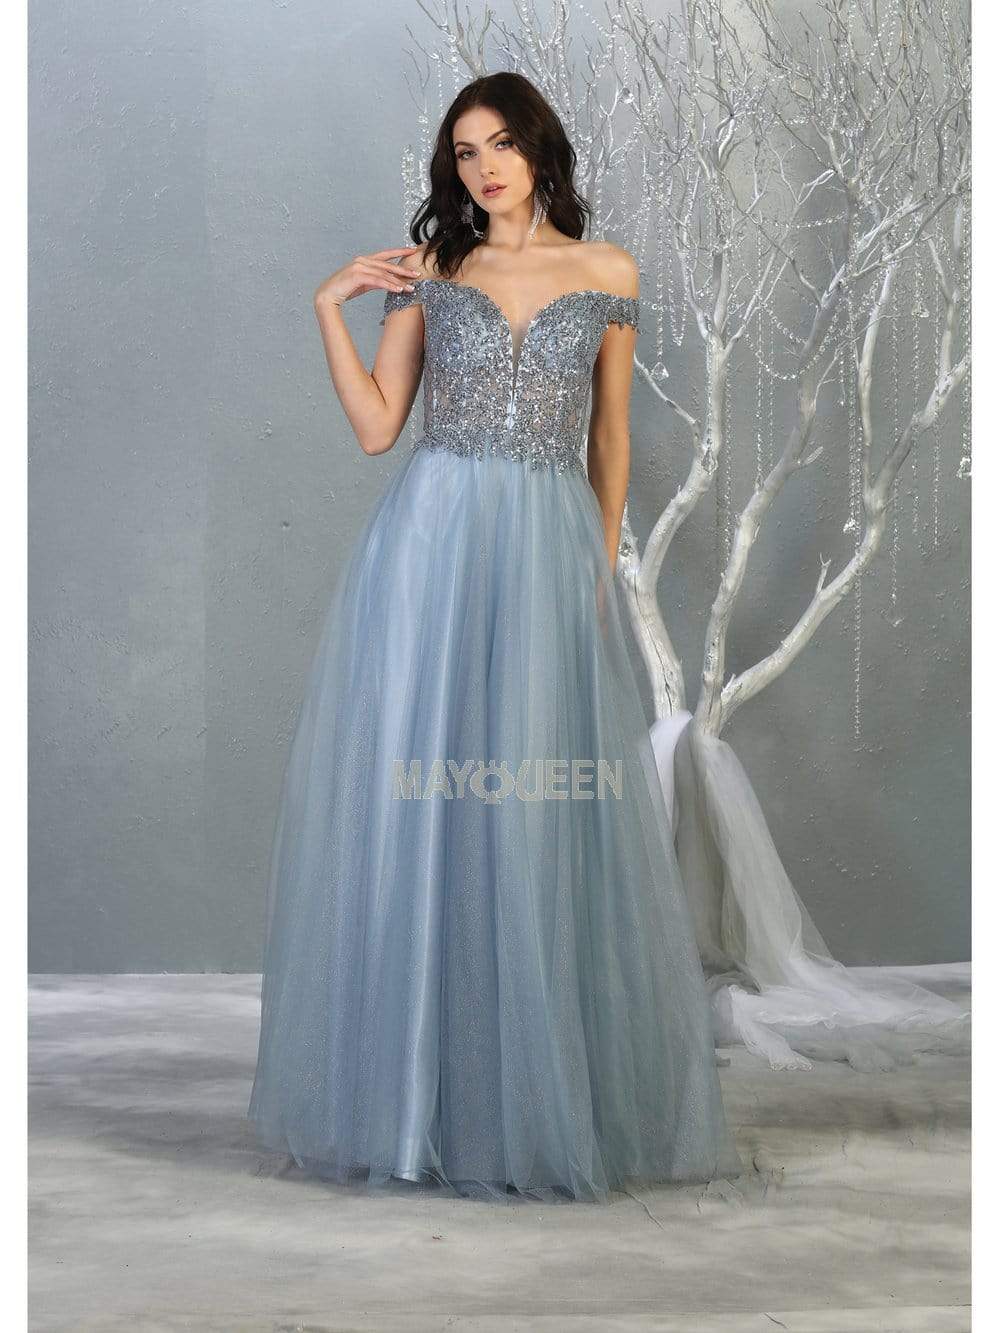 May Queen - RQ7864 Embellished Plunging Off-Shoulder Gown Prom Dresses 4 / Dusty-Blue